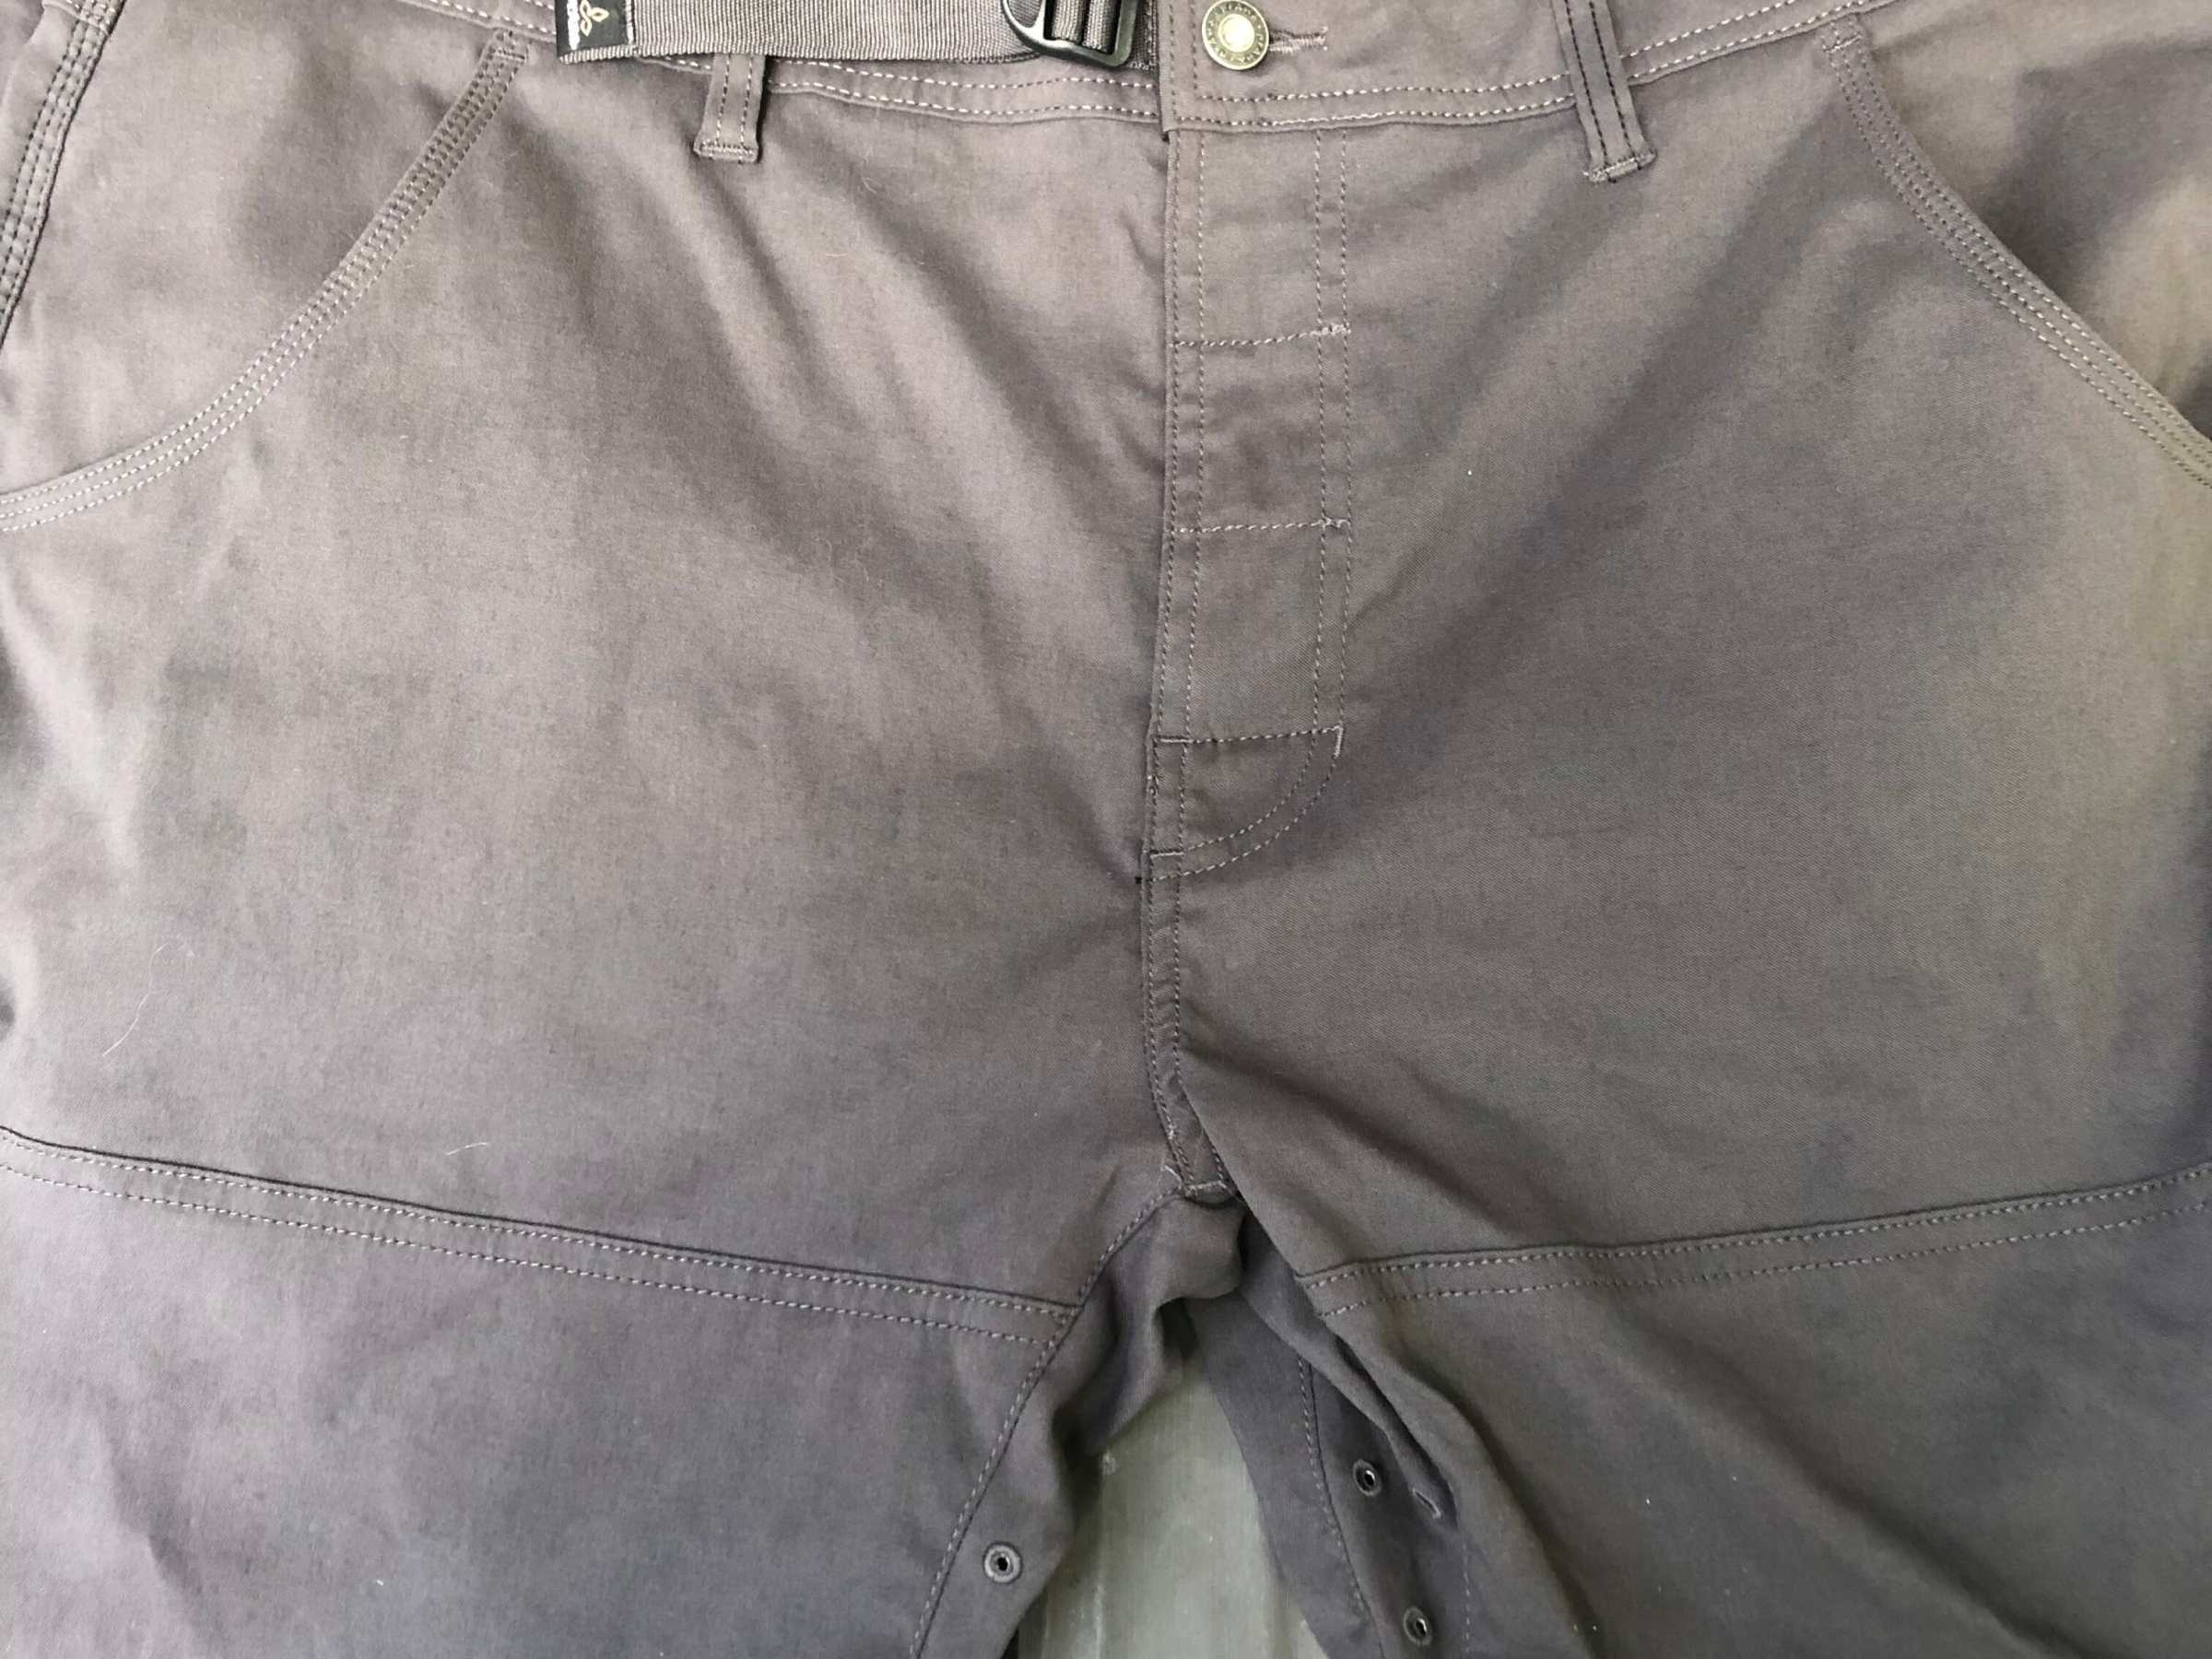 Prana Stretch Zion Pant For Hunting Review